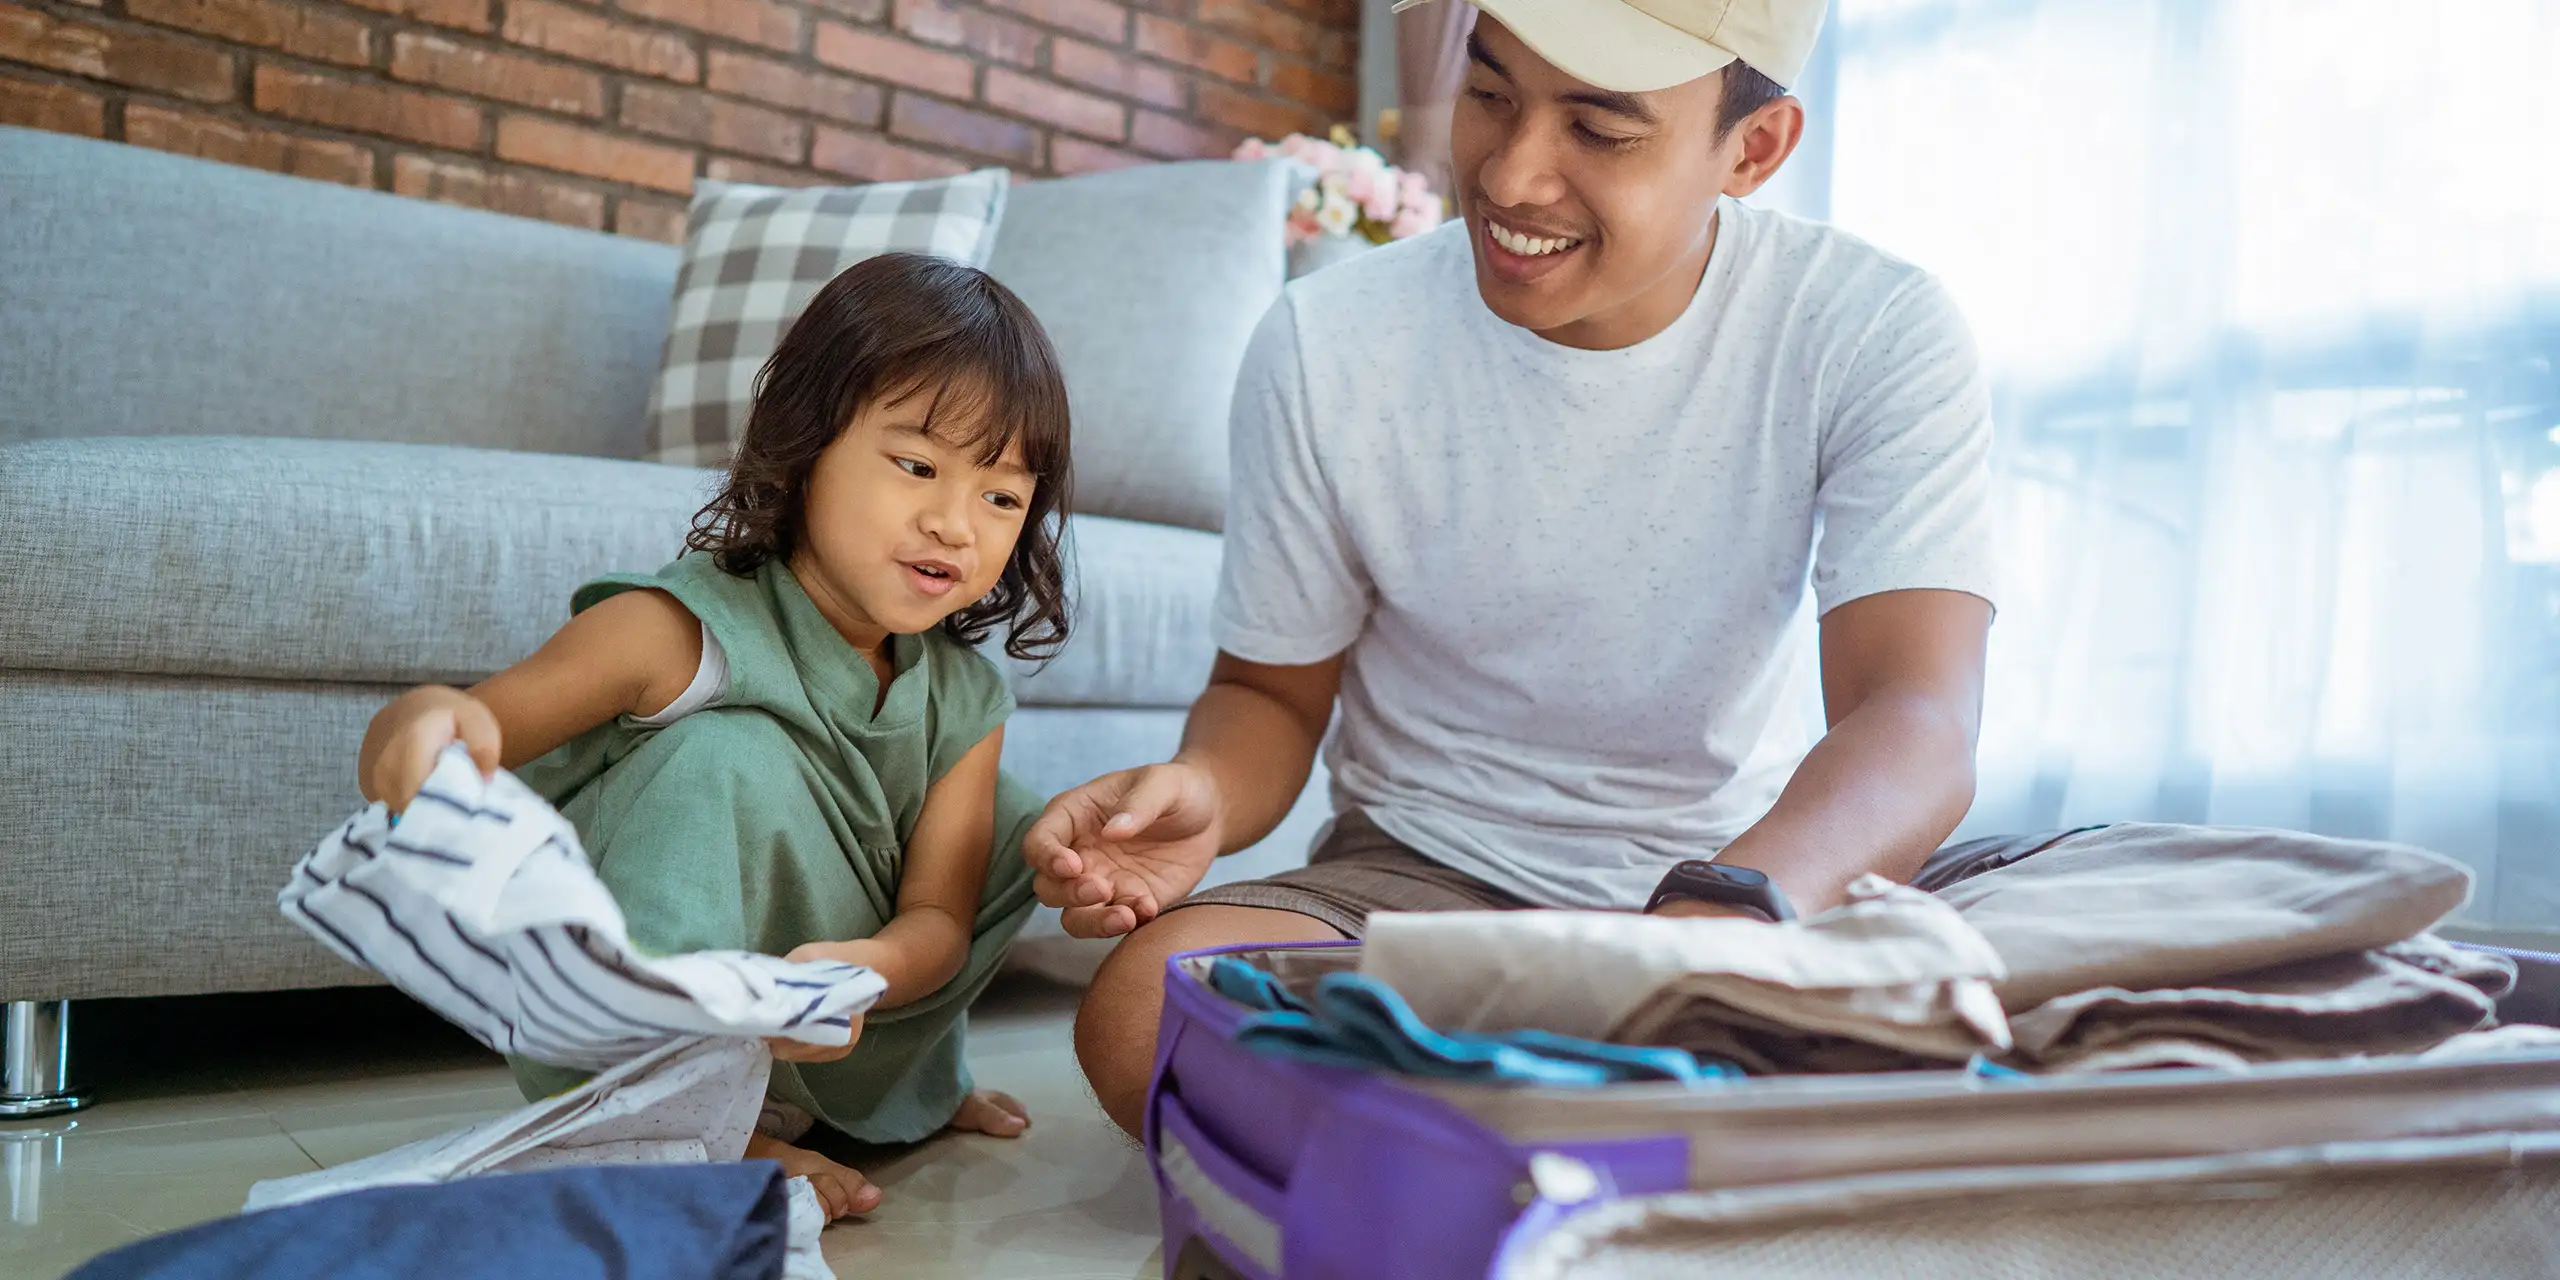 dad and kid happily prepare for holiday. packing up some clothes in suitcase for vacation; Courtesy of Odua Images/Shutterstock